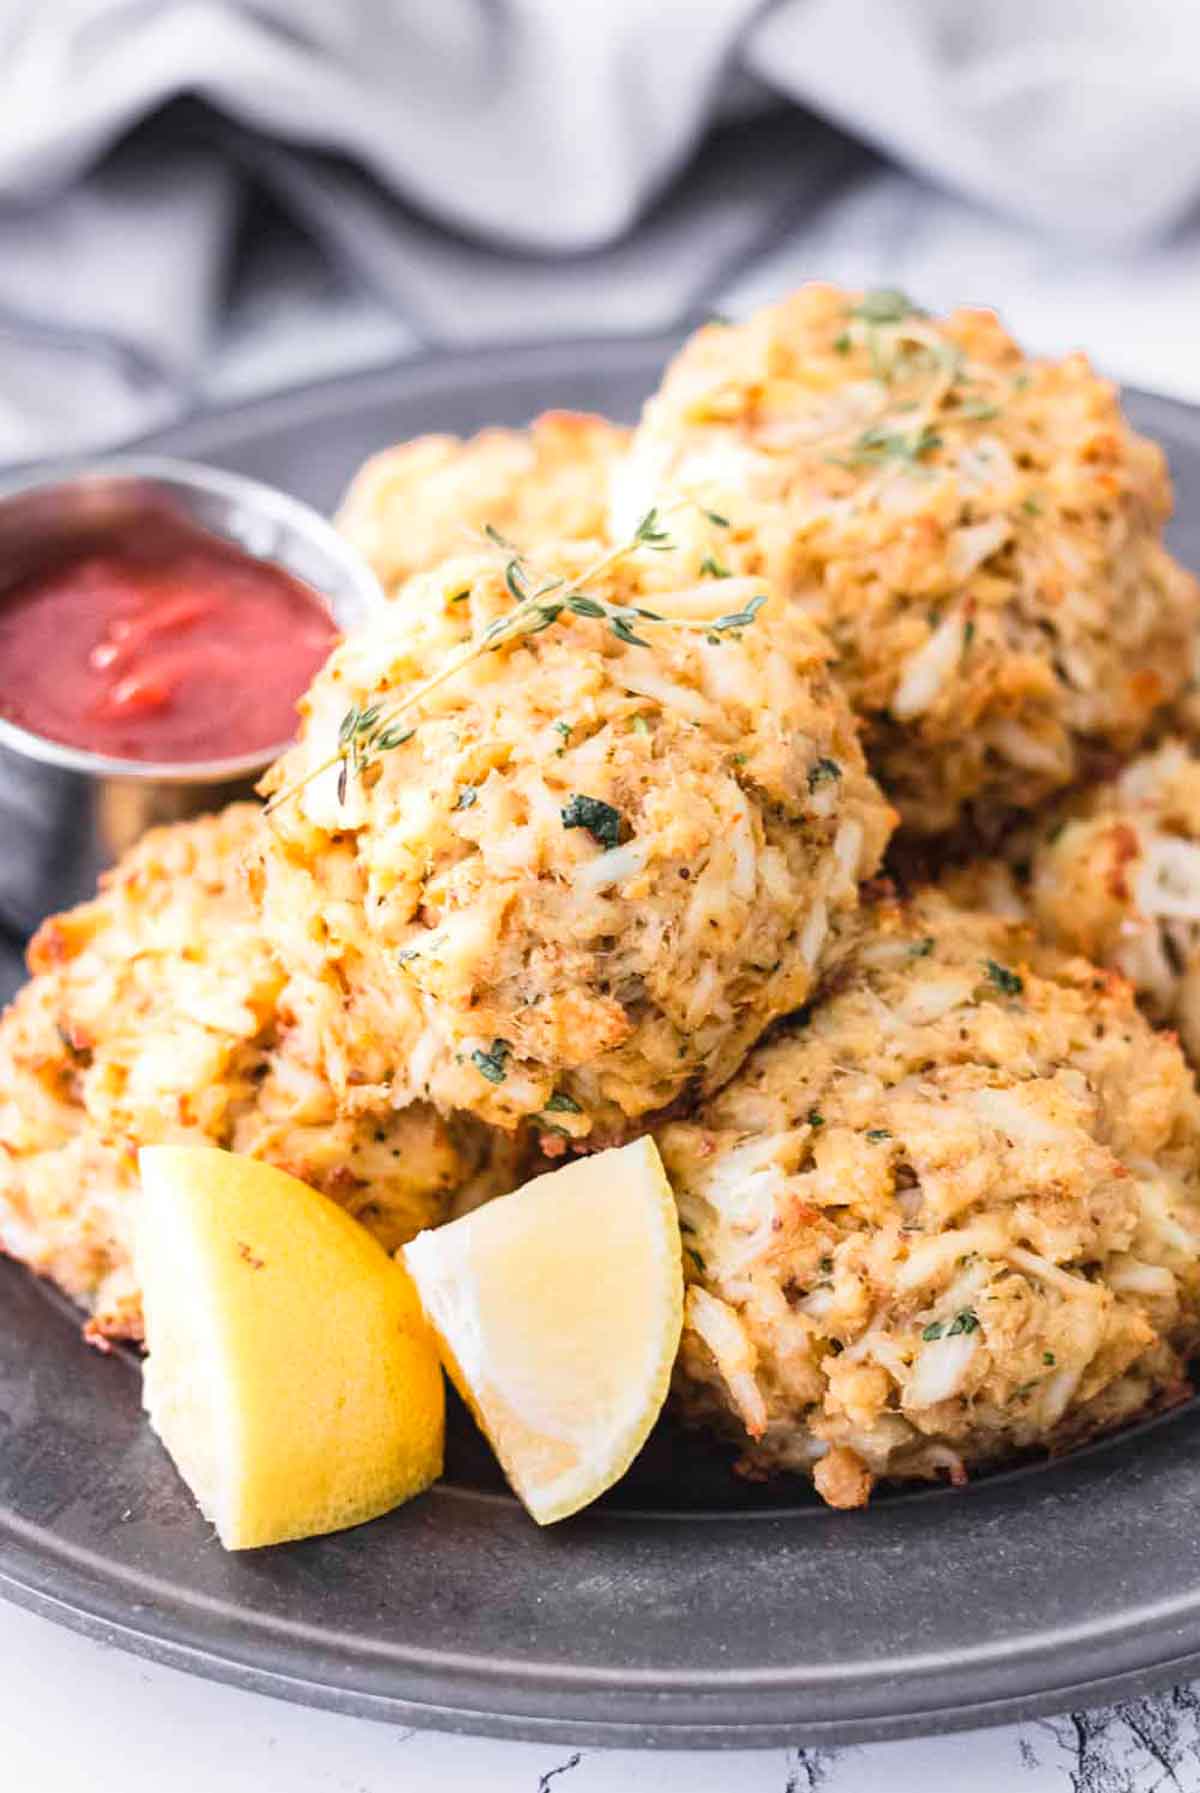 About 6 crab cakes on a plate with sliced lemon and a bowl of cocktail sauce.